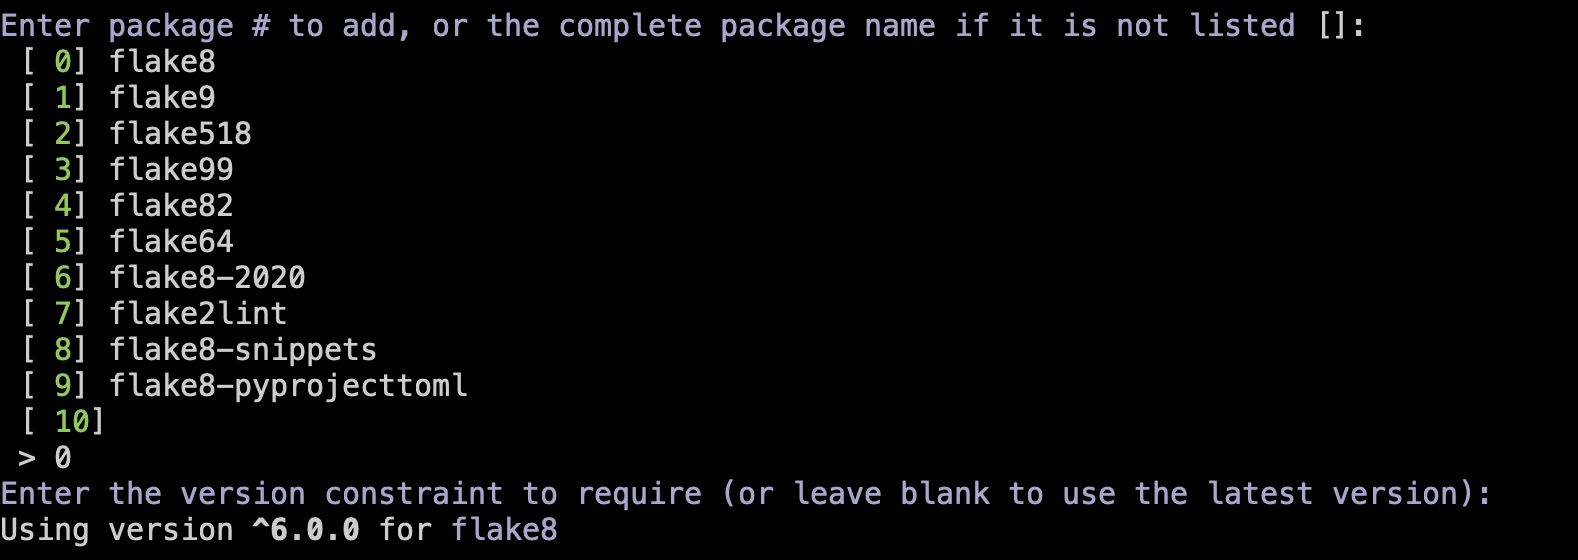 enter package name